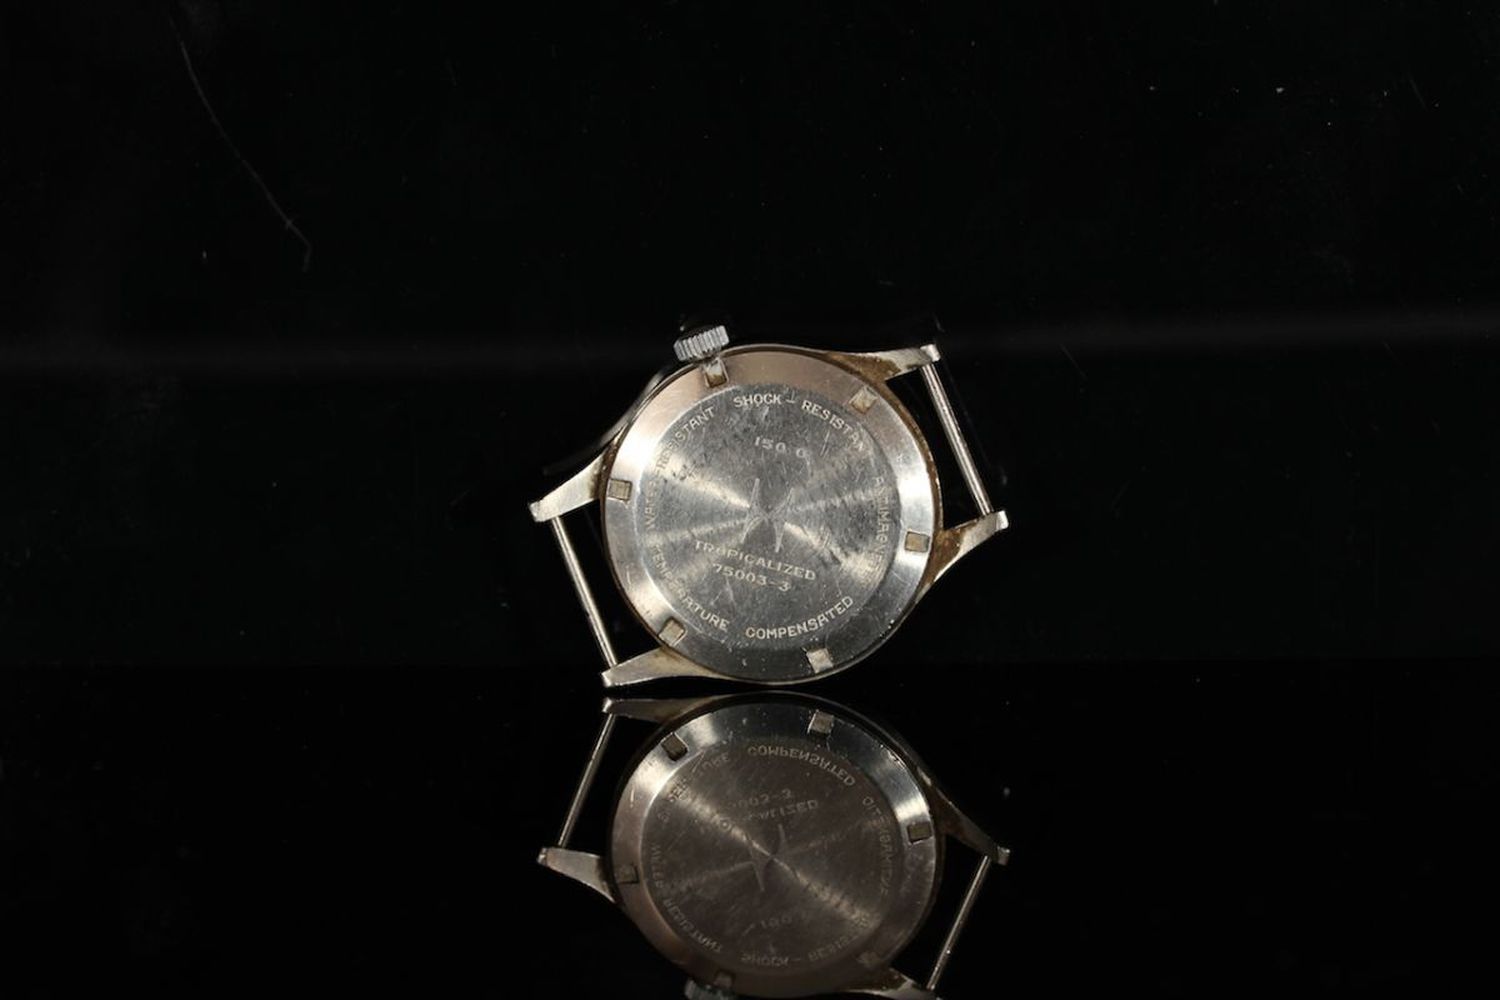 GENTLEMENS HAMILTON G.S. TROPICALIZED WRISTWATCH REF. 1 680 984, circular patina black dial with - Image 2 of 2